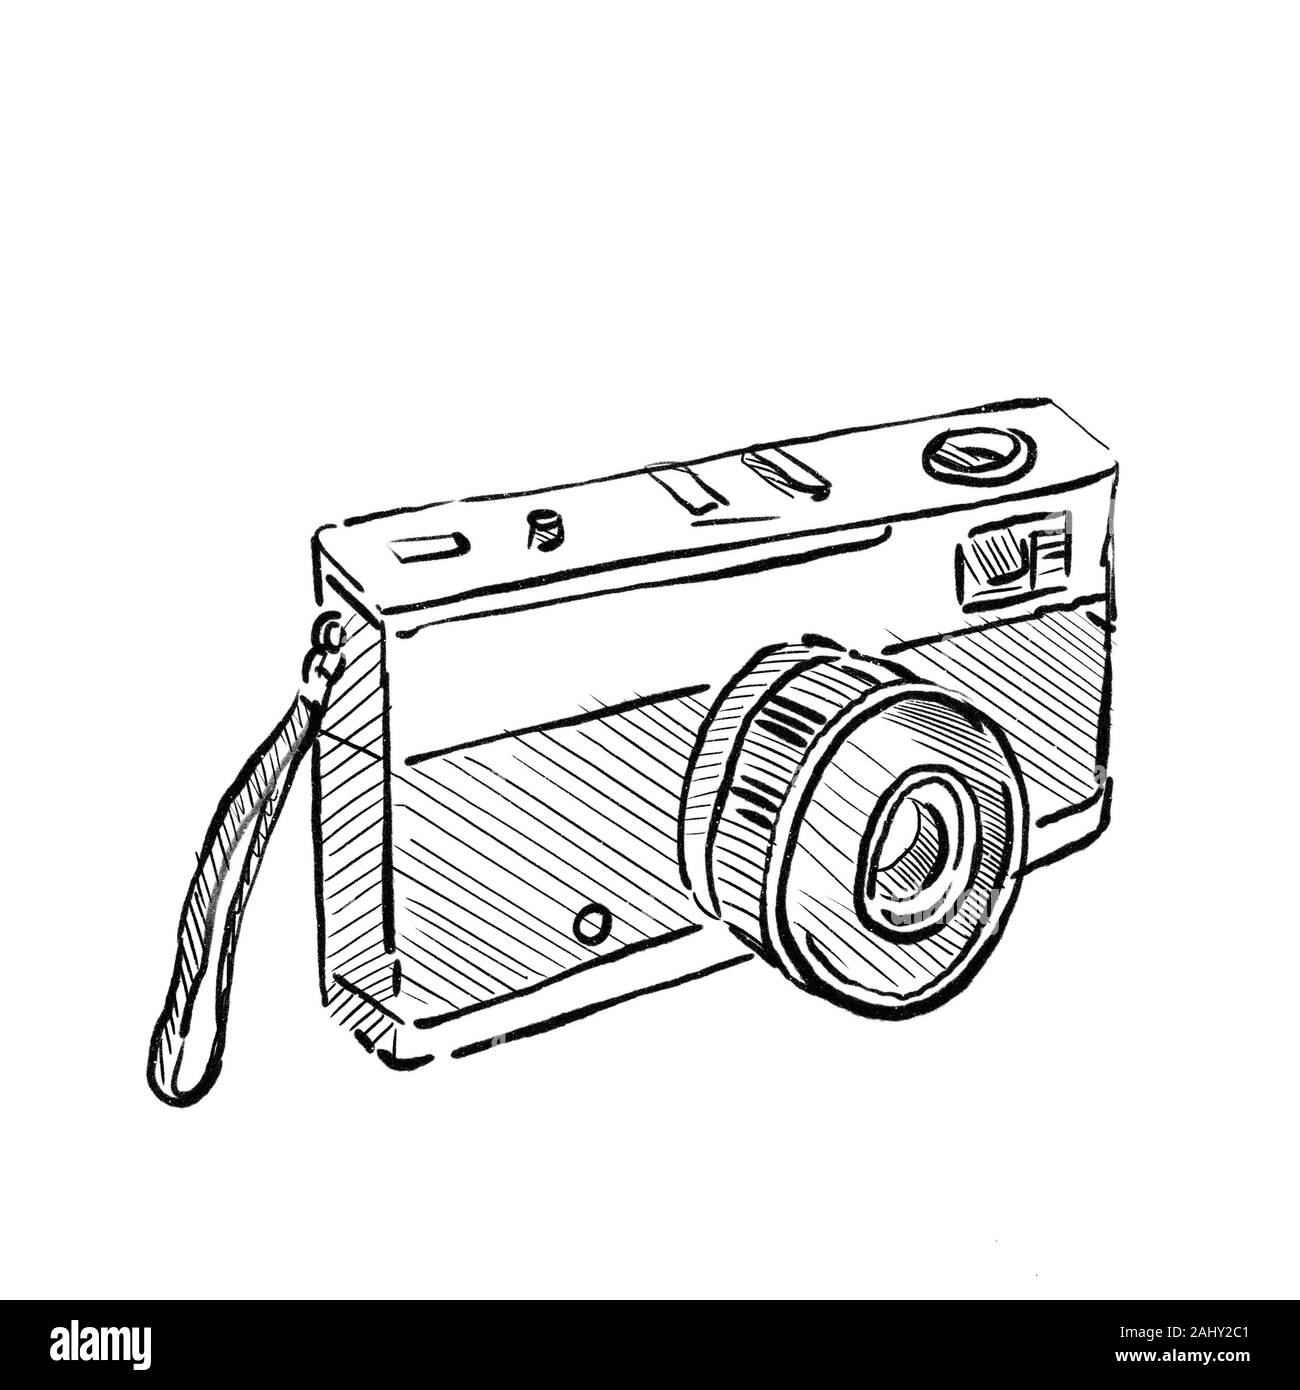 How to Draw a Camera